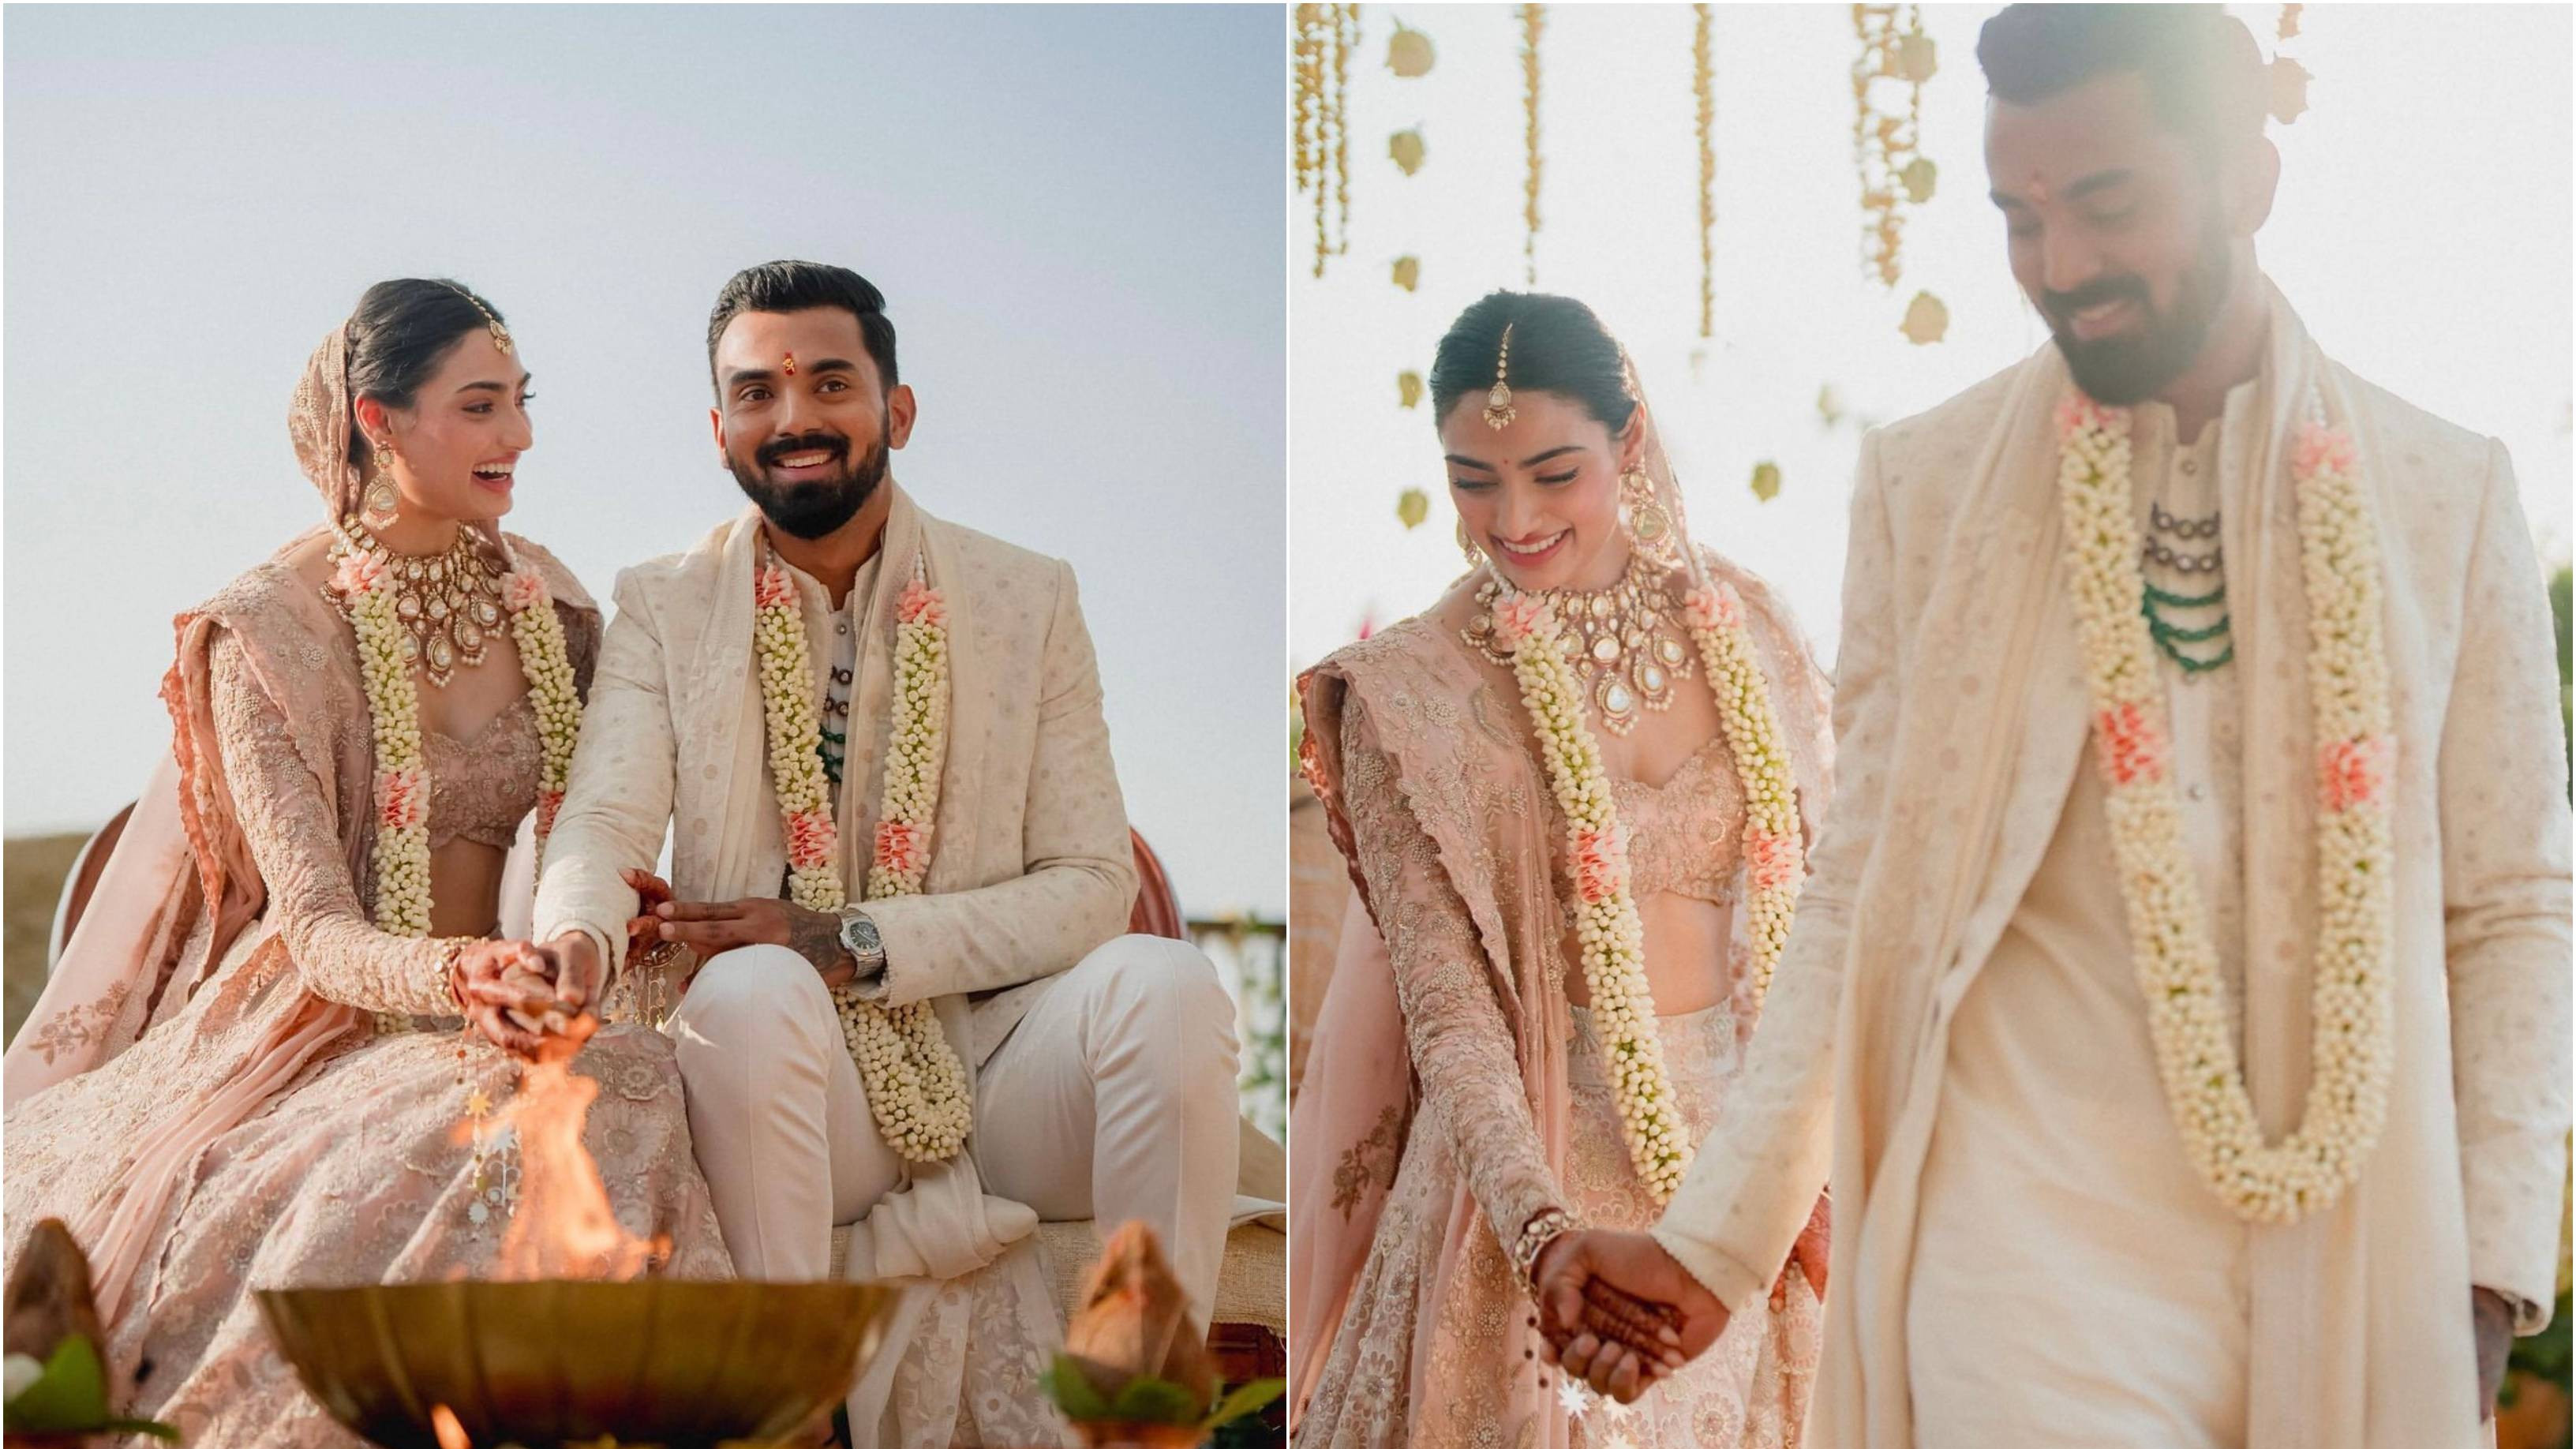 KL Rahul, Athiya Shetty tie marriage knot; share wedding pictures on Instagram